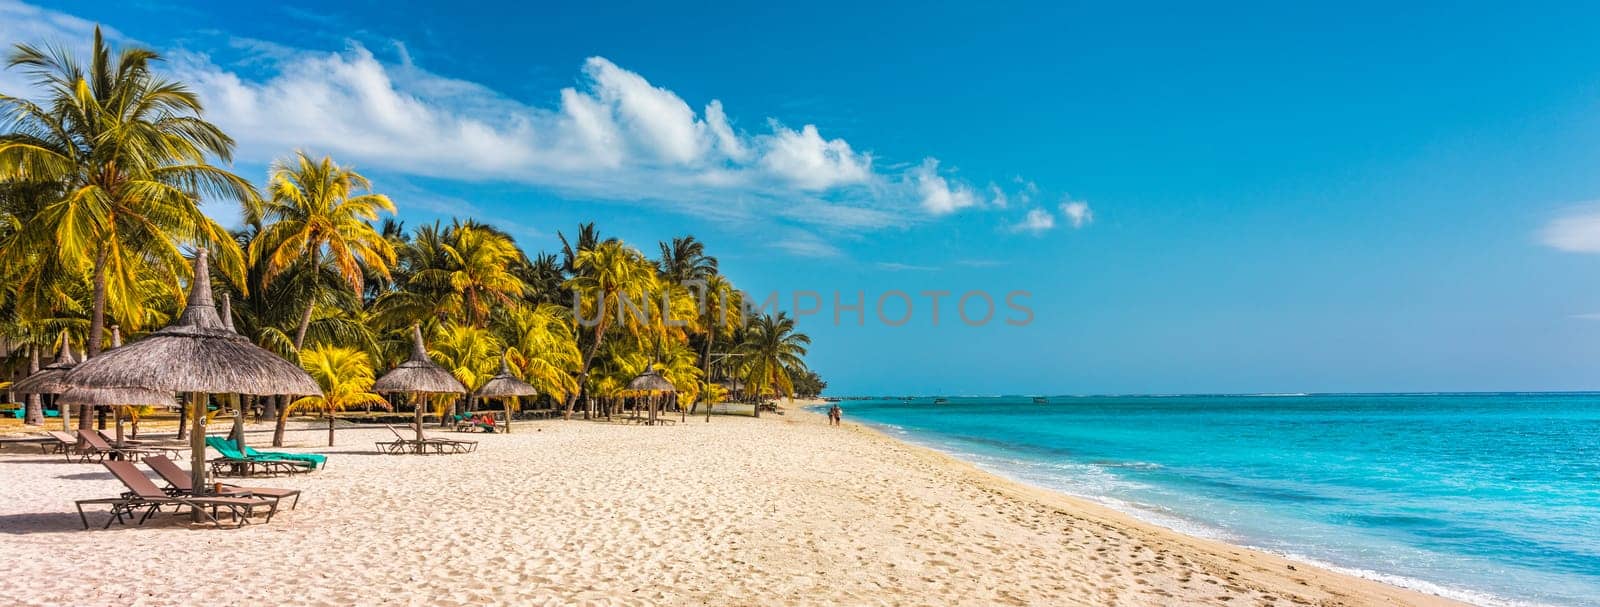 A beach with palm trees and umbrellas on Le morne Brabant beach in Mauriutius. Tropical crystal ocean with Le Morne beach and luxury beach in Mauritius. Le Morne beach with palm trees, white sand and luxury resorts, Mauritius. by DaLiu